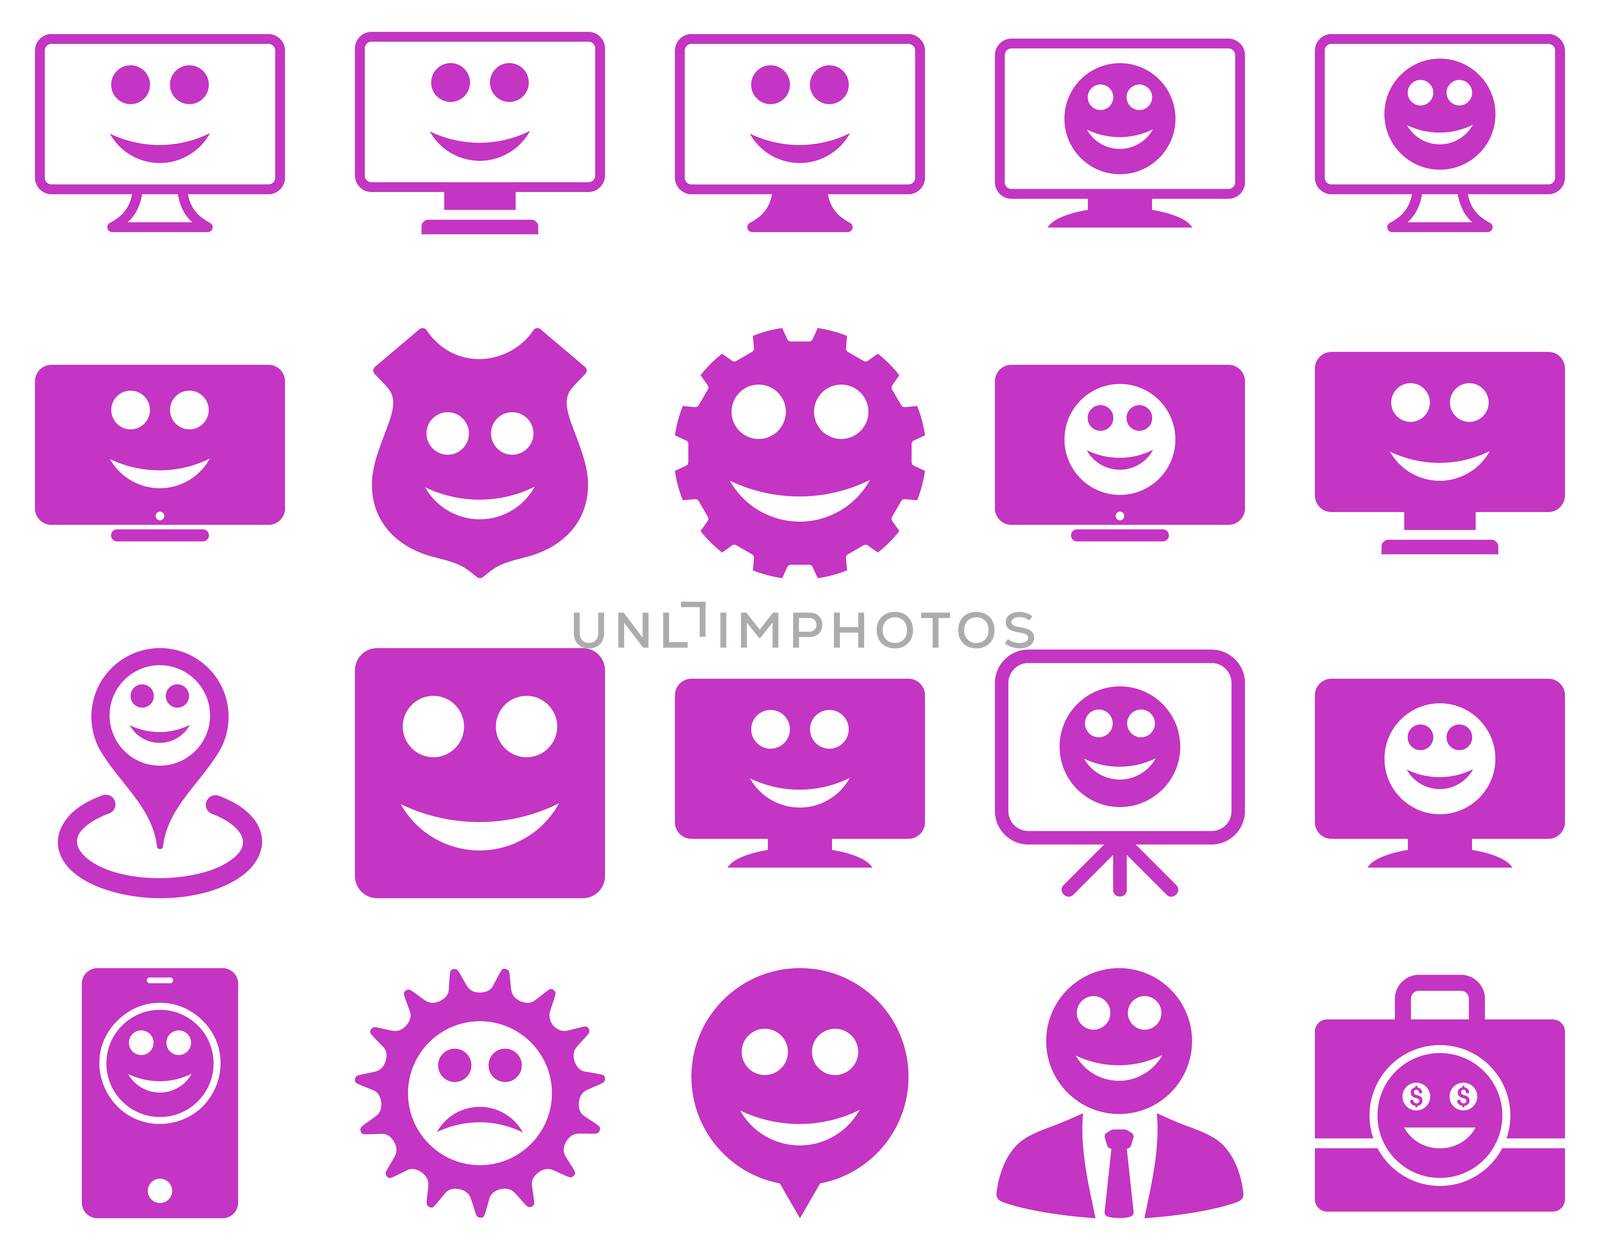 Tools, gears, smiles, dilspays icons. Glyph set style is flat images, violet symbols, isolated on a white background.